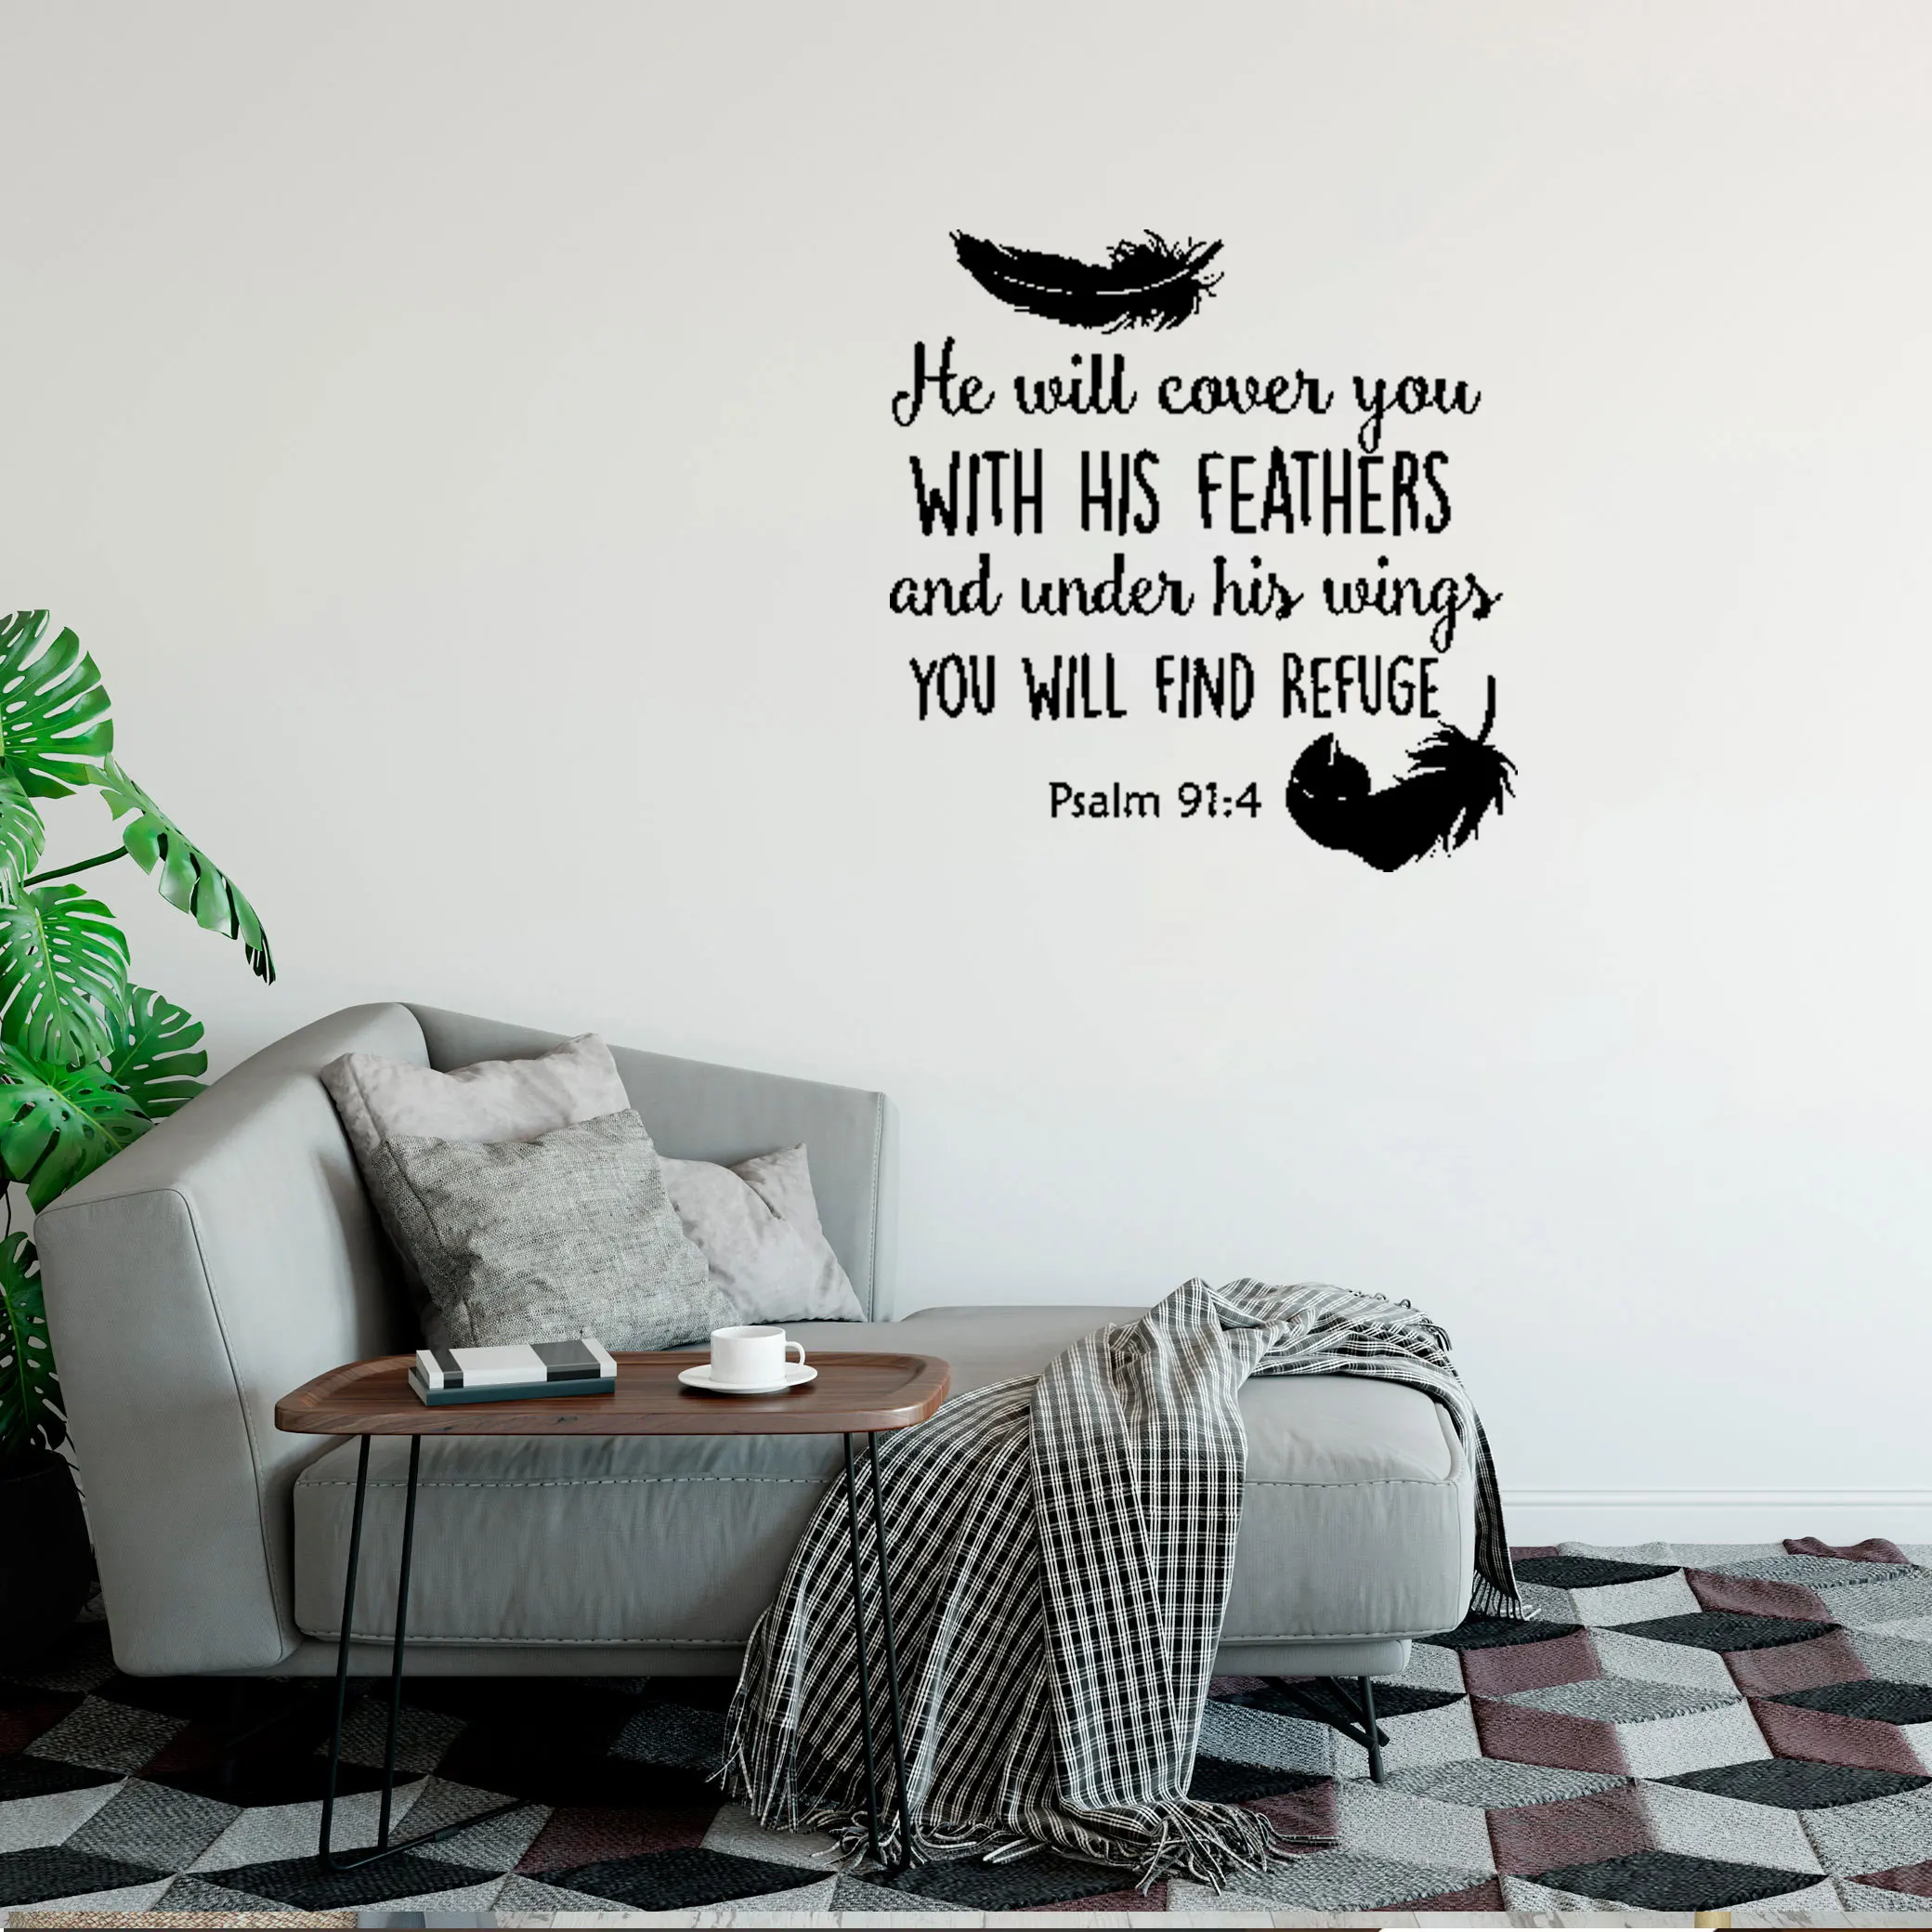 

Newly Arrivals Psalm 91:4 Bible Verse Wall Sticker Decal Bedroom Decor He Will Cover You With...Vinyl Quotes Wallpaper DW6074